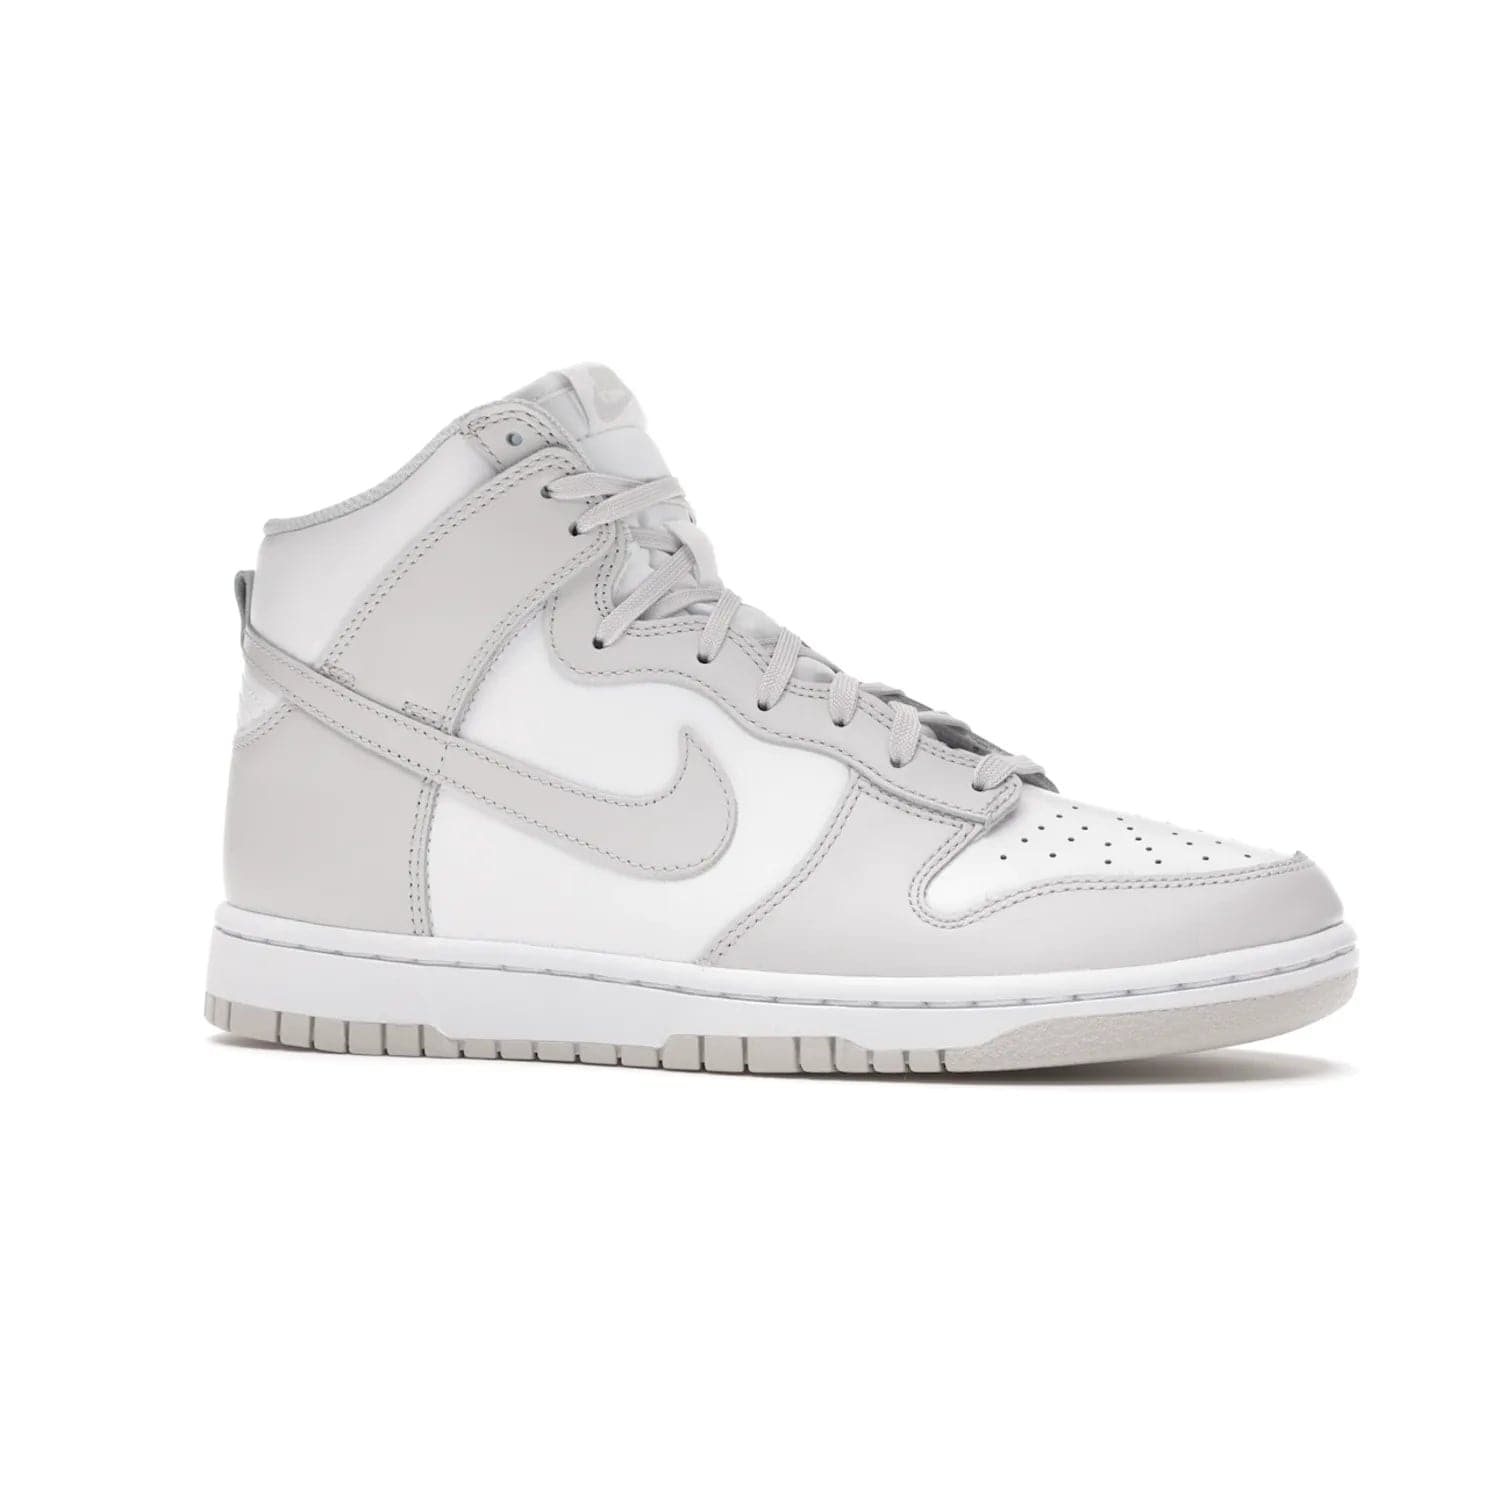 Nike Dunk High Retro White Vast Grey (2021) - Image 3 - Only at www.BallersClubKickz.com - Nike Dunk High Retro White Vast Grey 2021: classic '80s basketball sneaker with a crisp white base, grey overlays, midsole tooling and outsole. Dropped Feb. 2021.